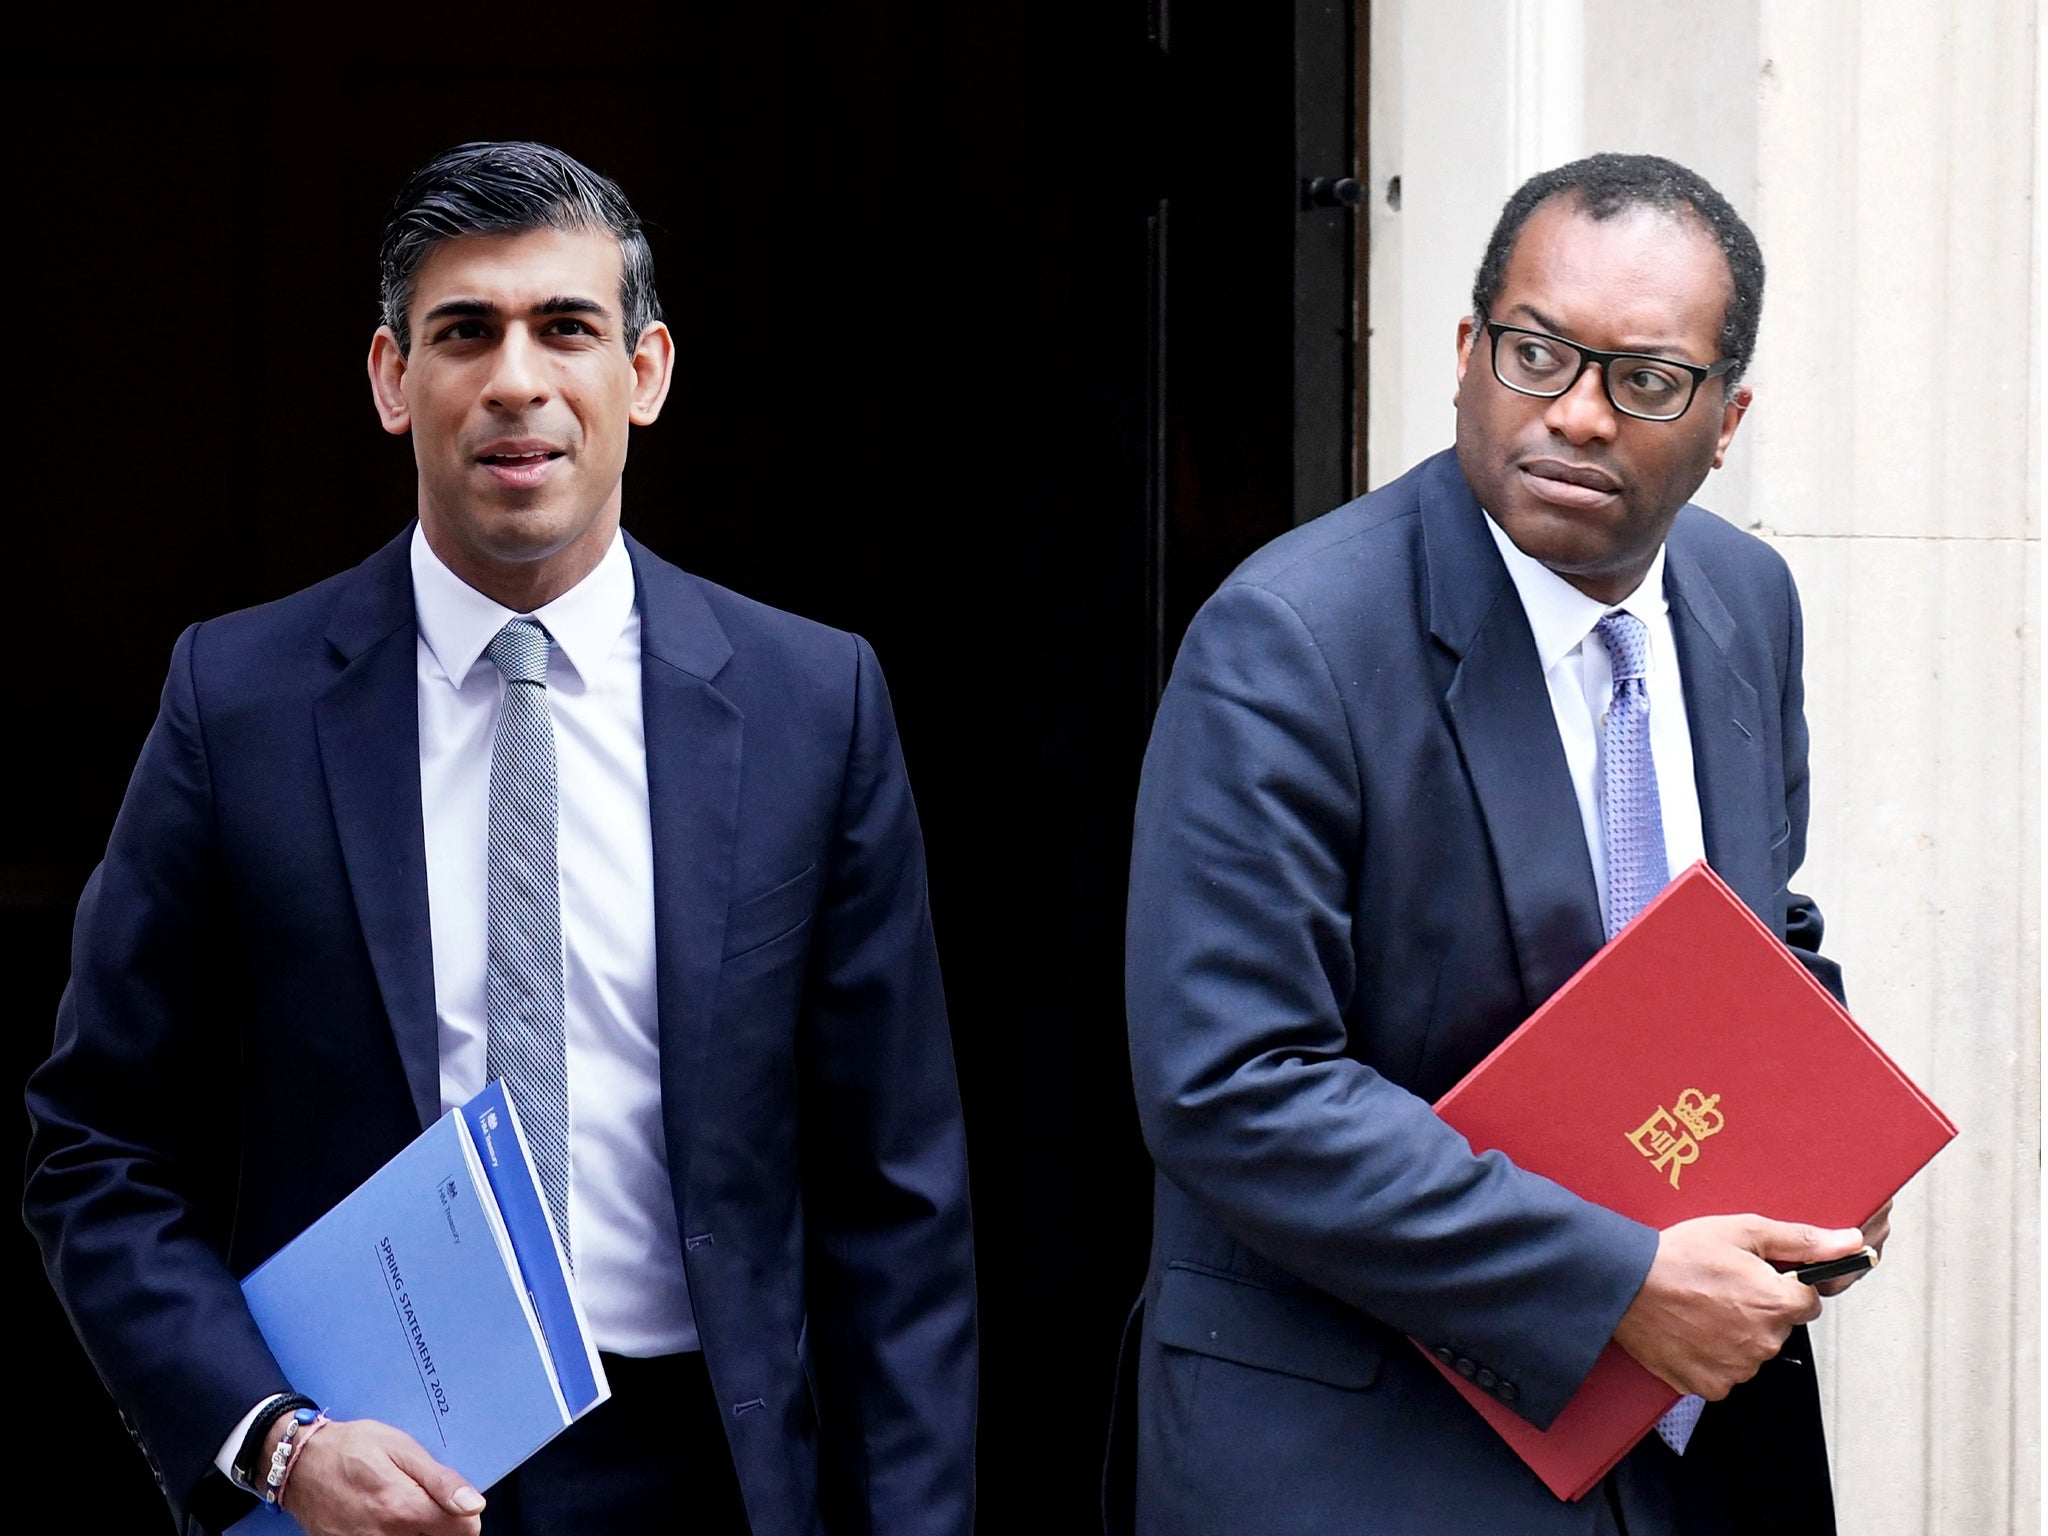 Kwasi Kwarteng says he does not support a windfall tax but Rishi Sunak is considering one